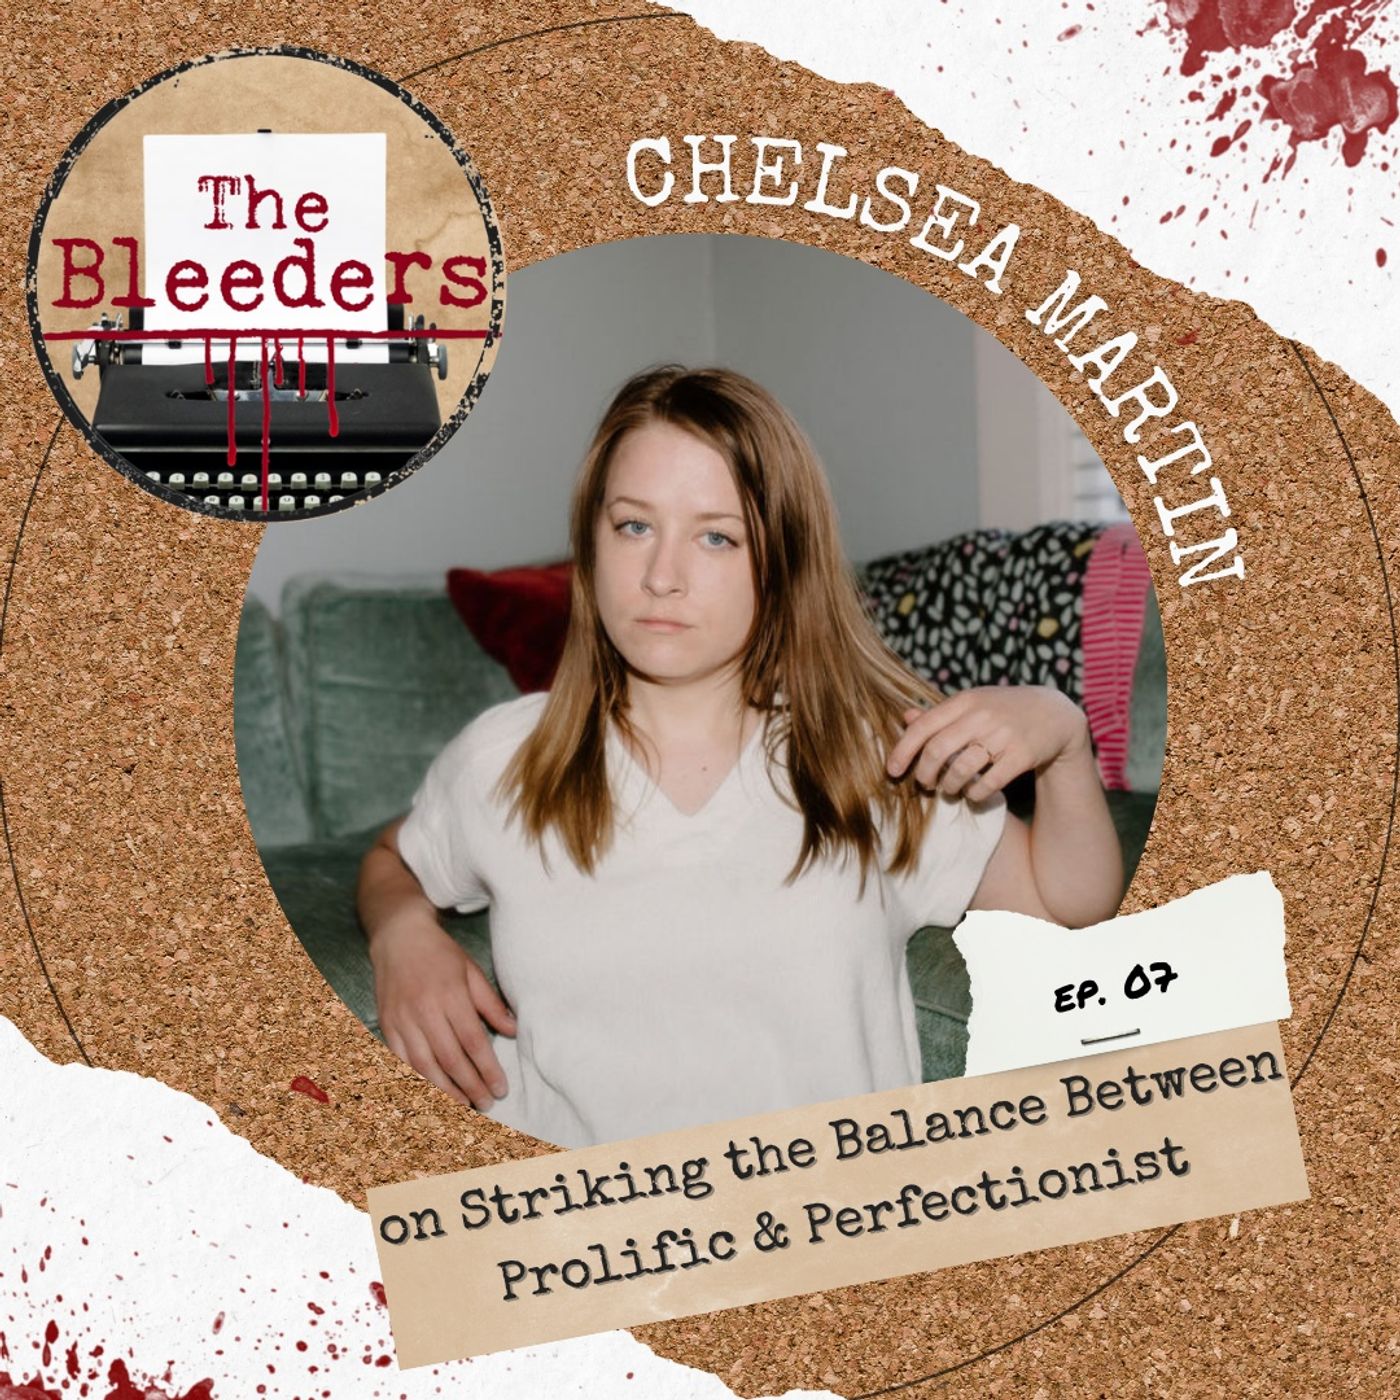 Chelsea Martin on Striking the Balance Between Prolific & Perfectionist